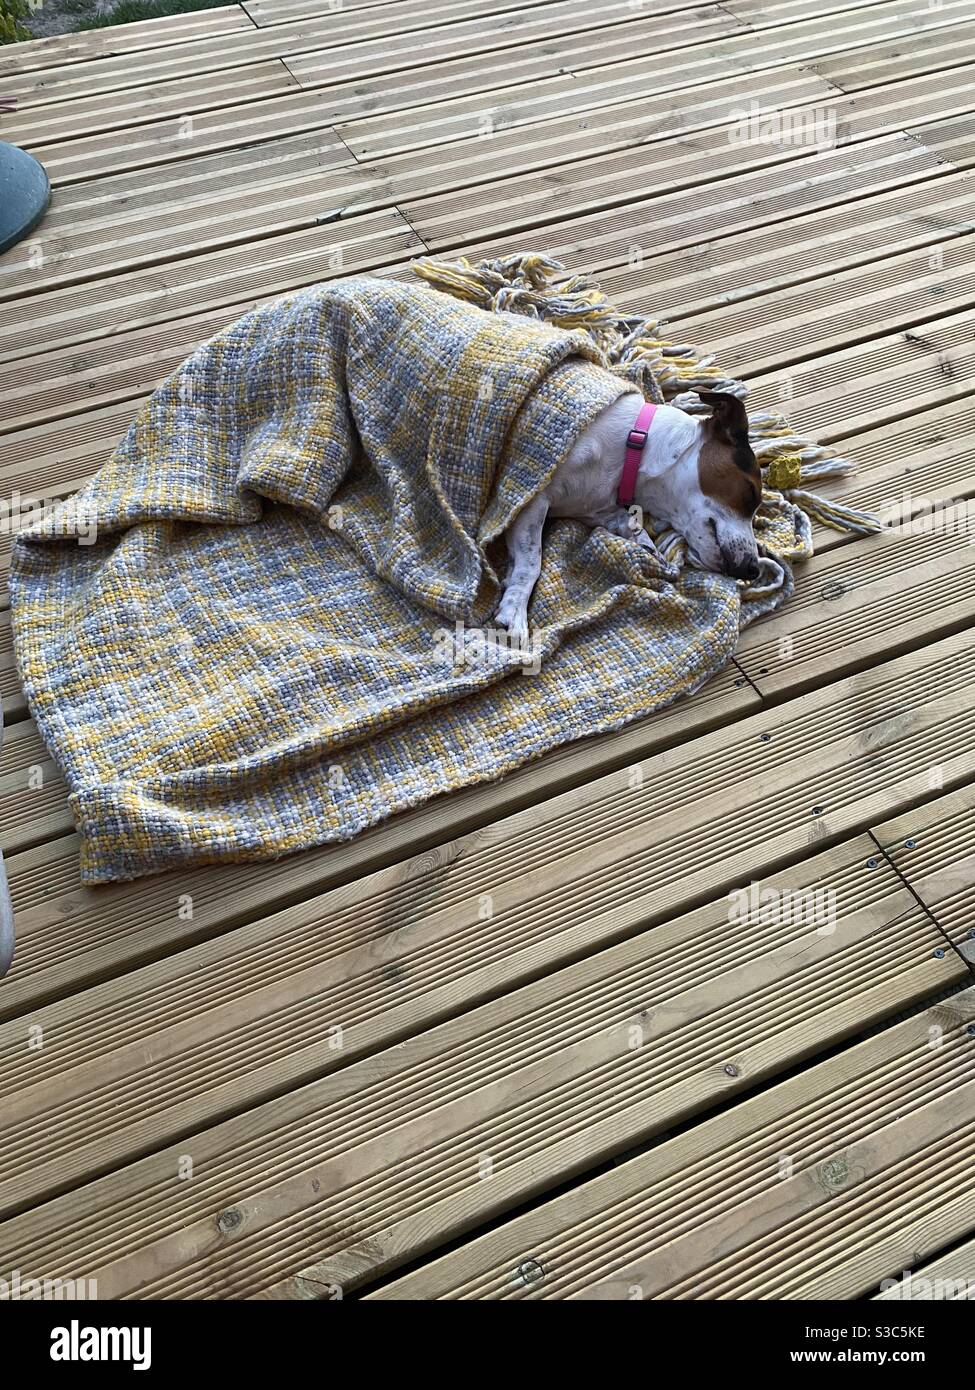 Jack Russell dog asleep in blanket on decking Stock Photo